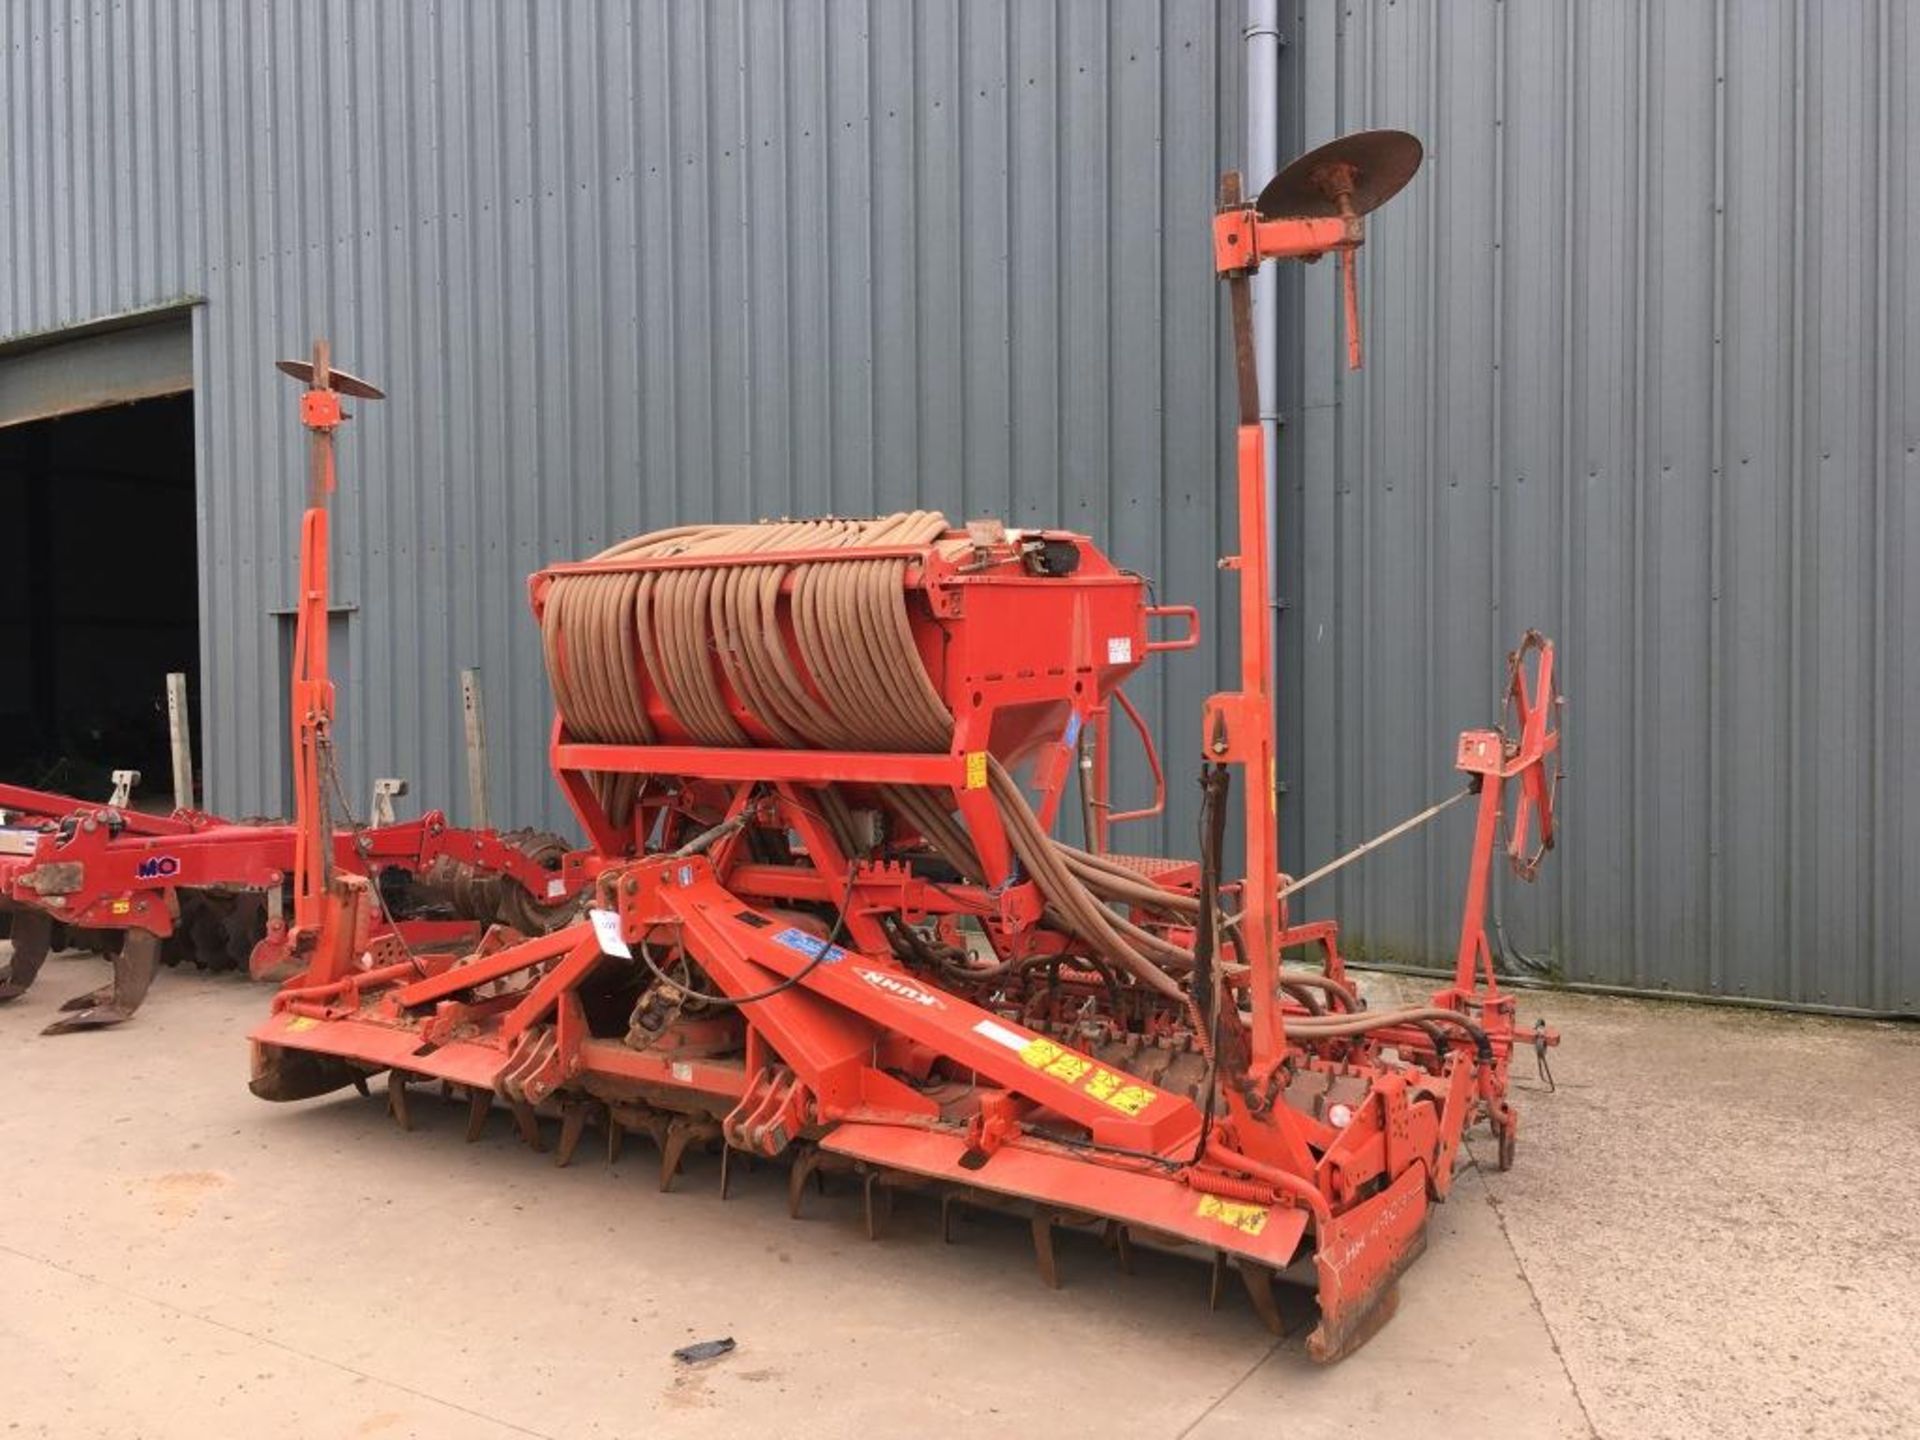 Kuhn HR 4003D 14' power harrow, serial number: A4631 (2002) with Kuhn Venta LC 402 seed drill, - Bild 2 aus 15